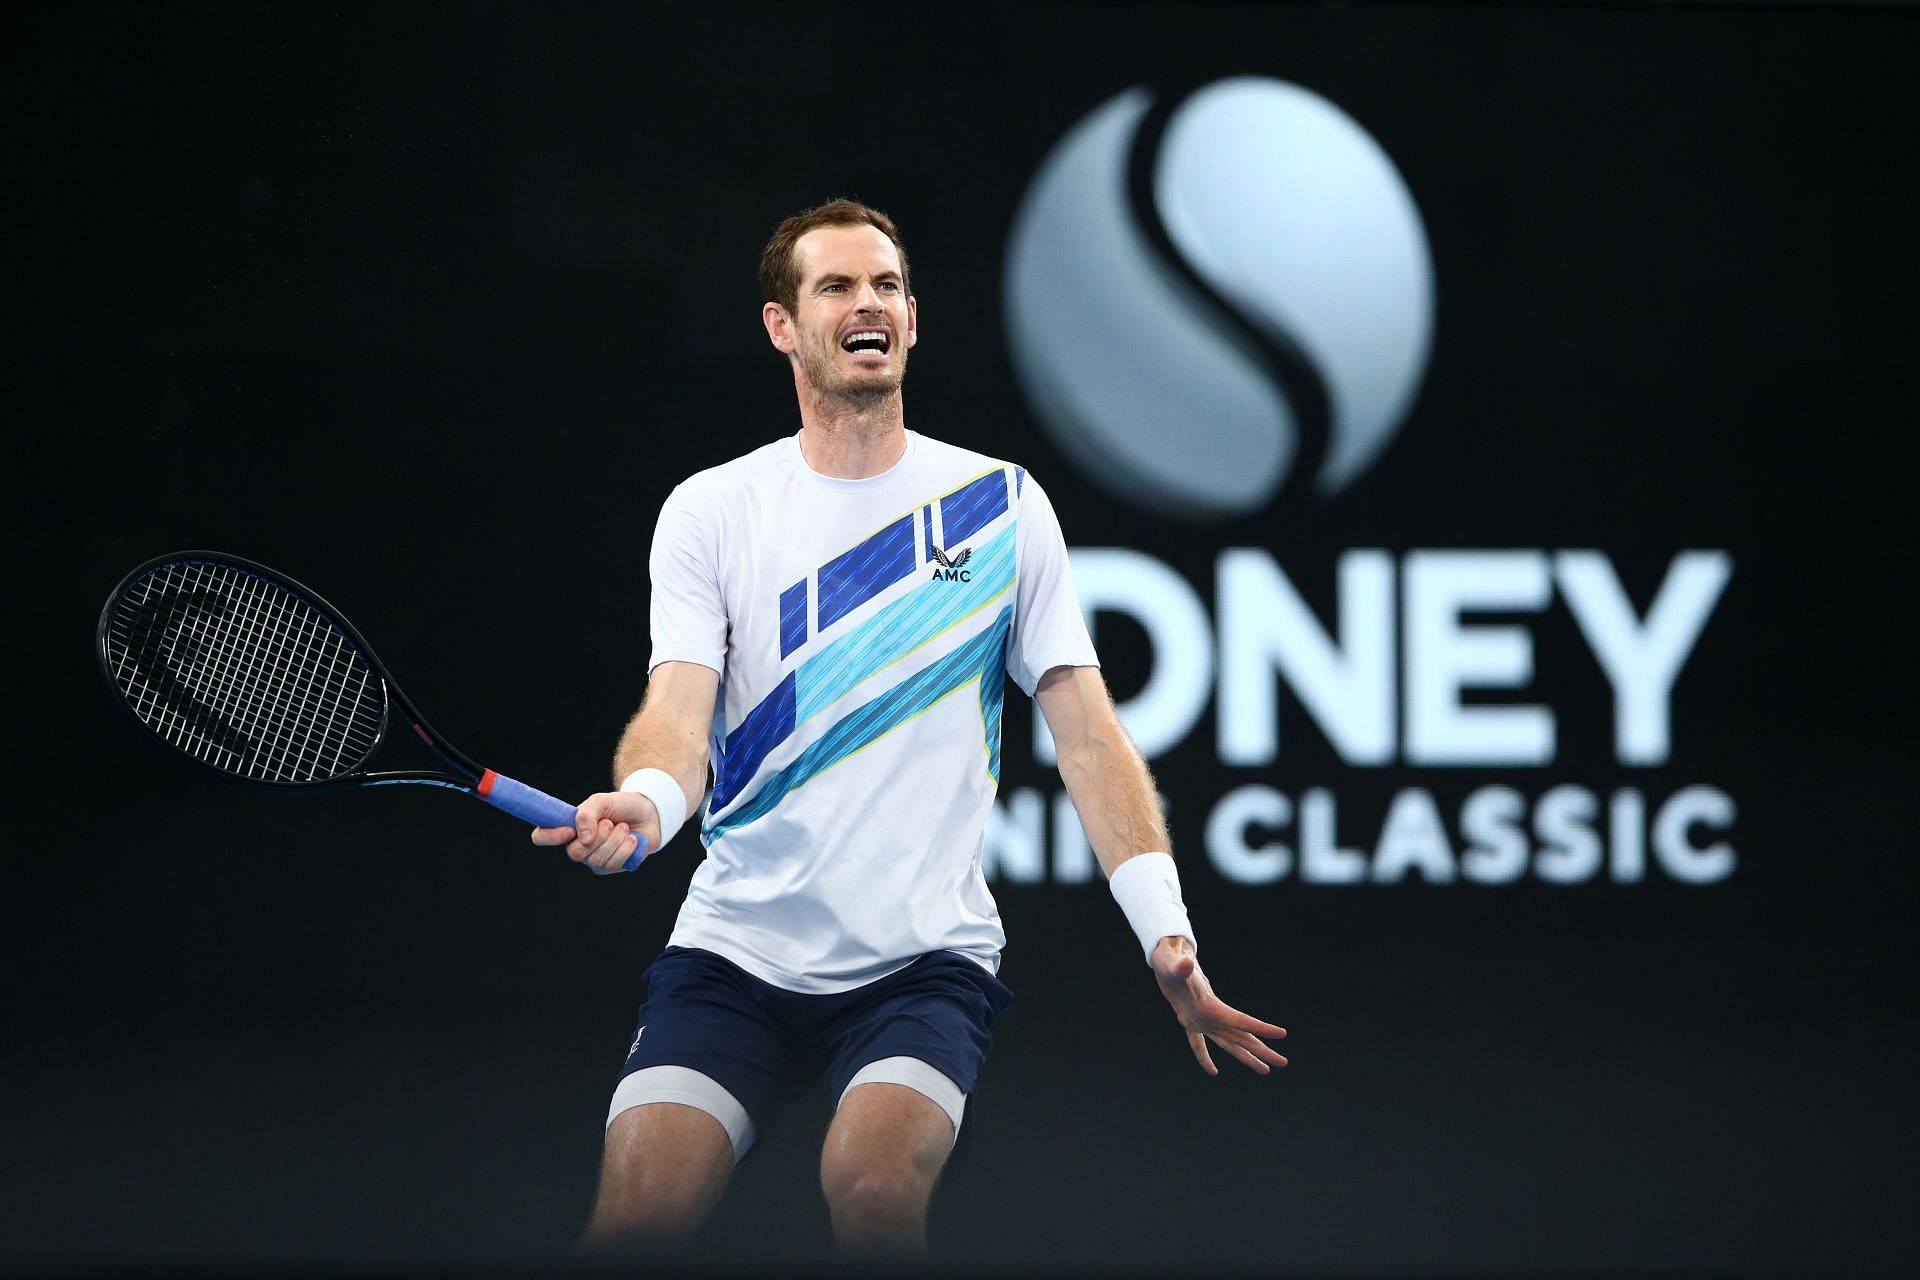 Andy Murray reached the final of the Sydney International